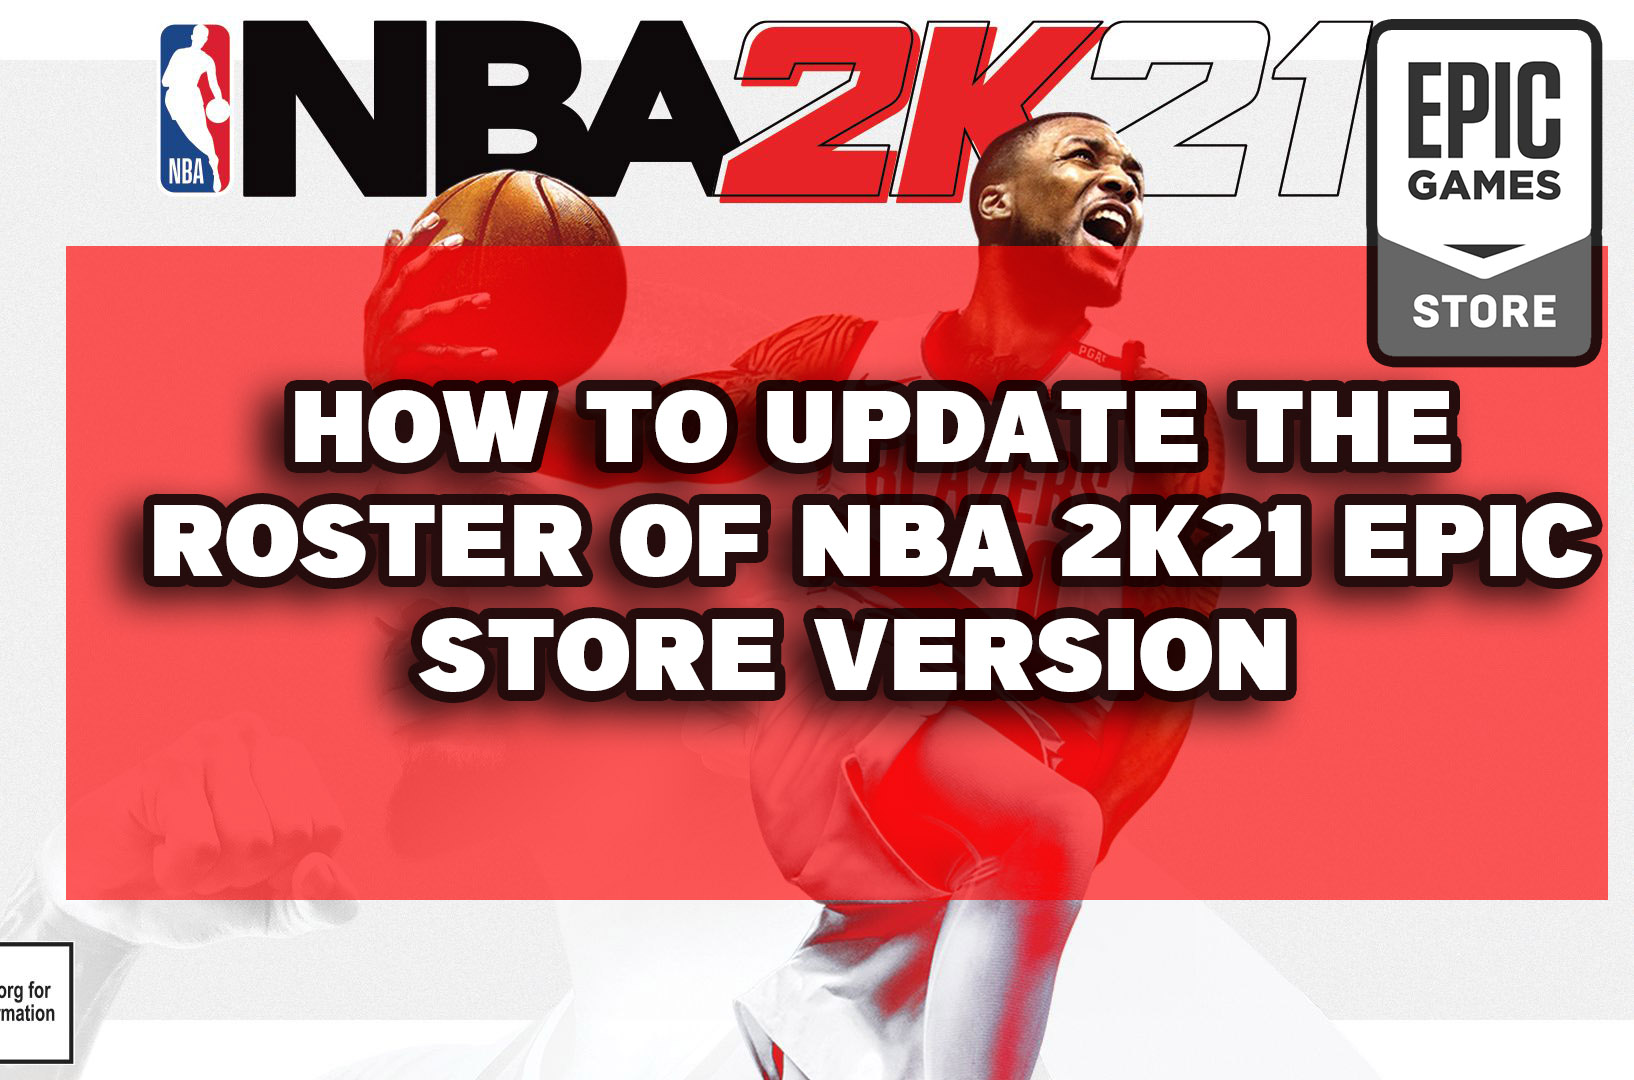 HOW TO UPDATE THE ROSTER OF NBA 2K21 EPIC GAMES VERSION